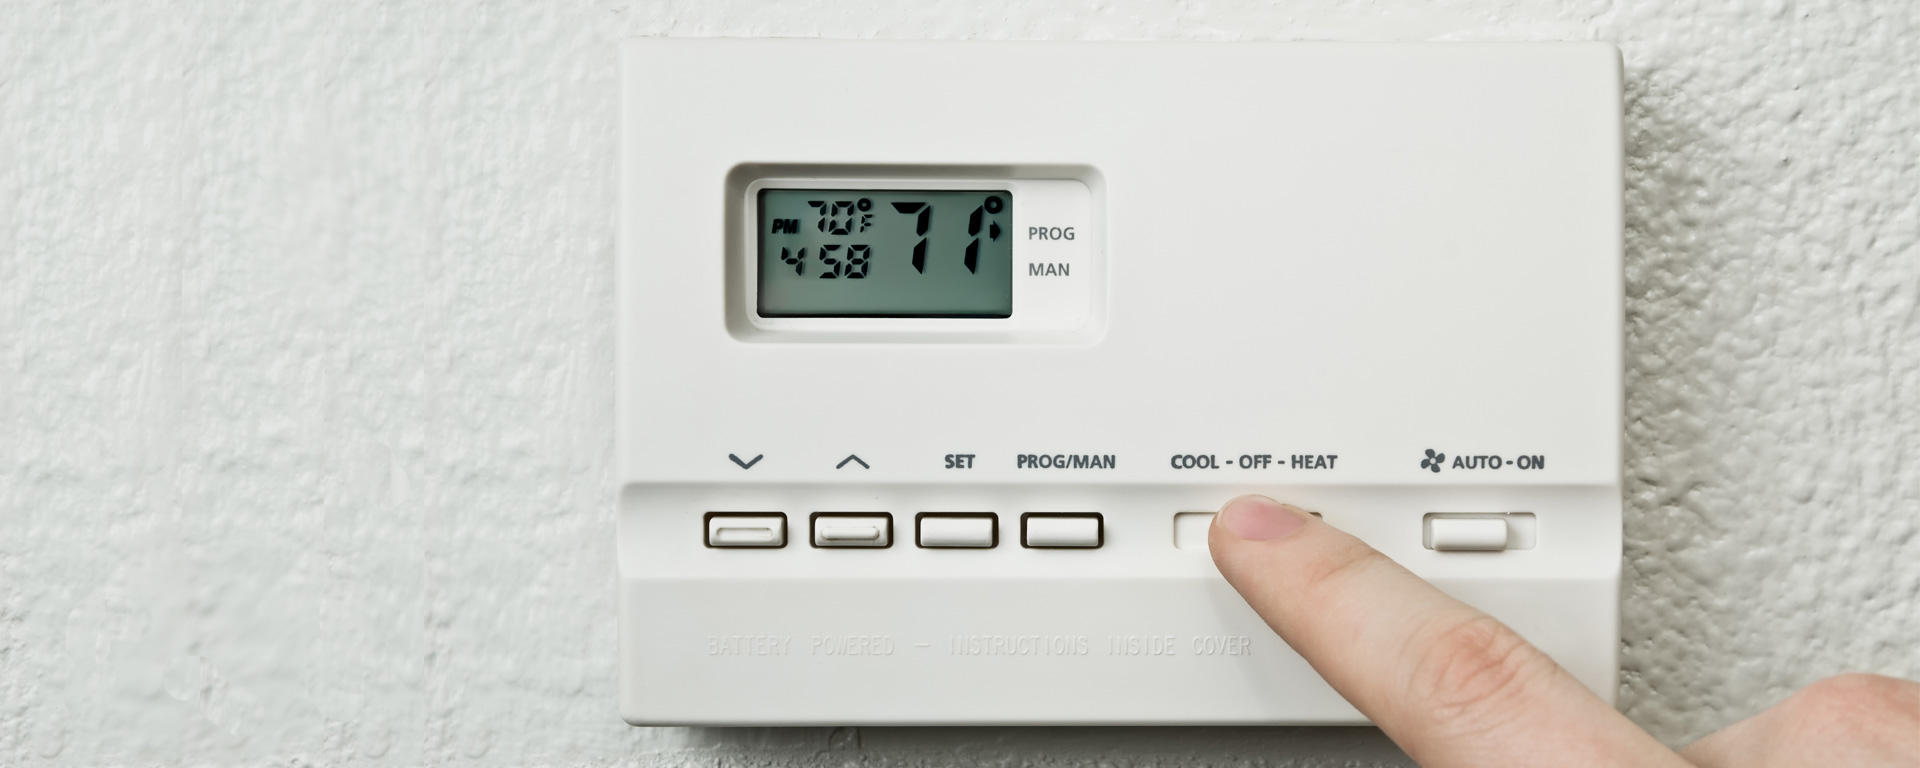 setting thermostat in home